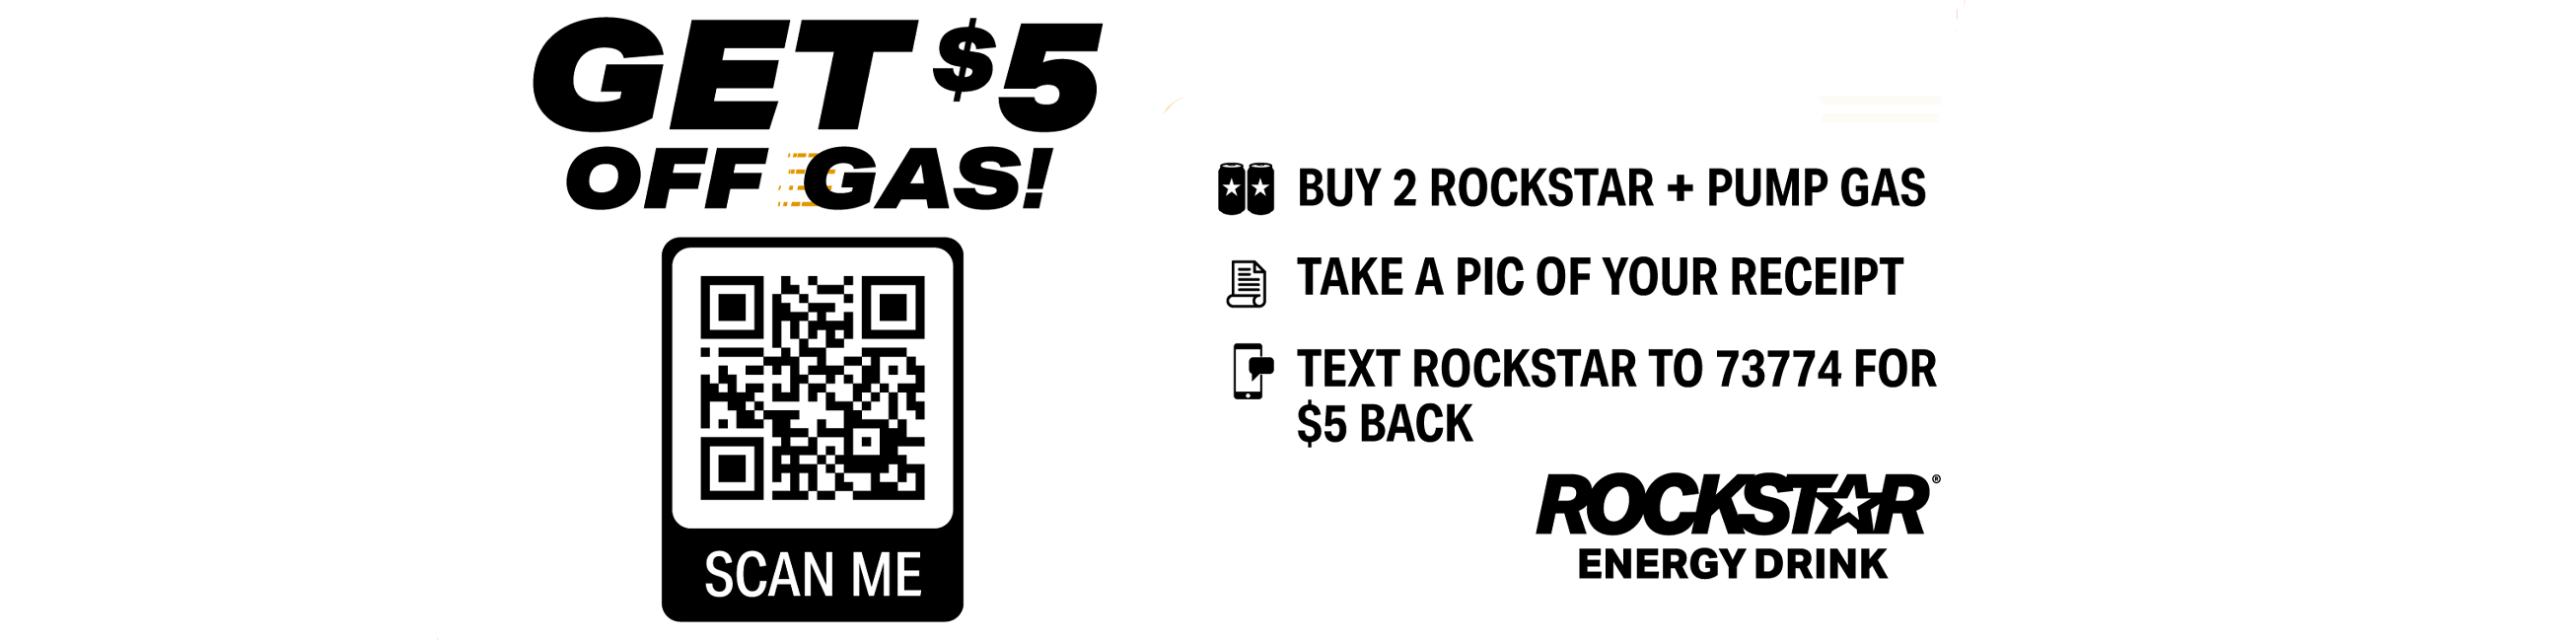 Image showing QR code to scan; to get offer buy 2 Rockstar and buy gas, take a pic of your receipt, and text "ROCKSTAR" to 73774 for $5 back.